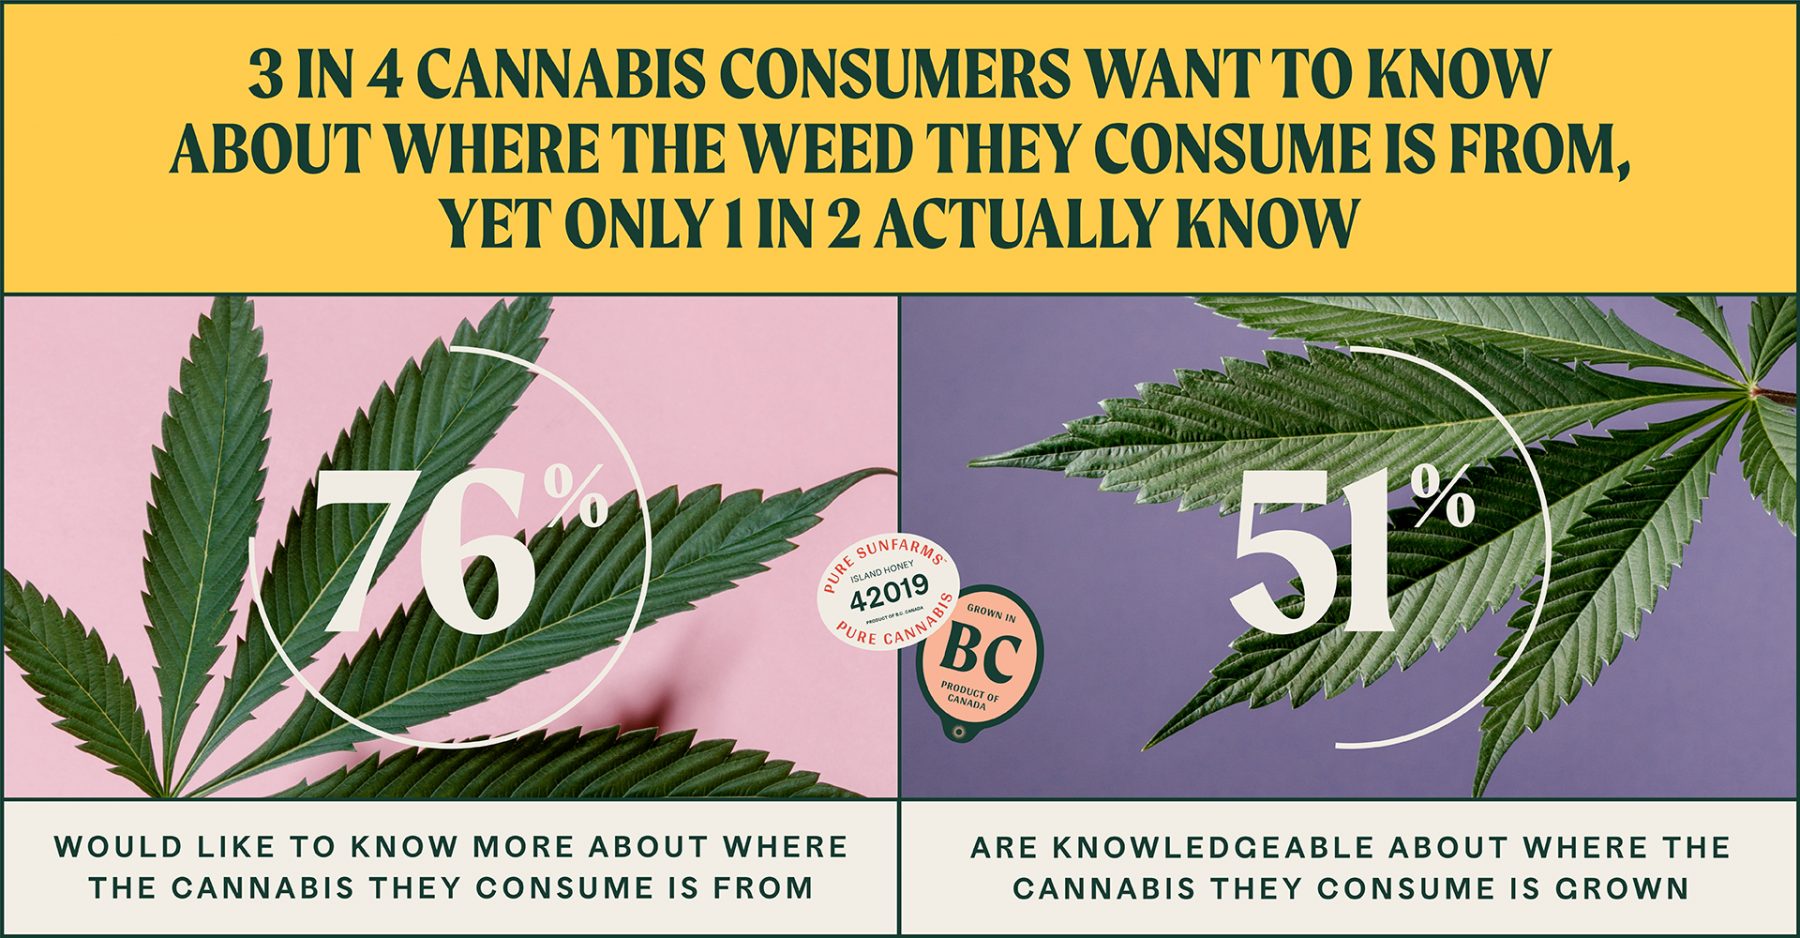 Graphic with stats: 76% of people would like to know more about where their weed comes from, 51% are knowledgeable about where the cannabis they consume is grown.
